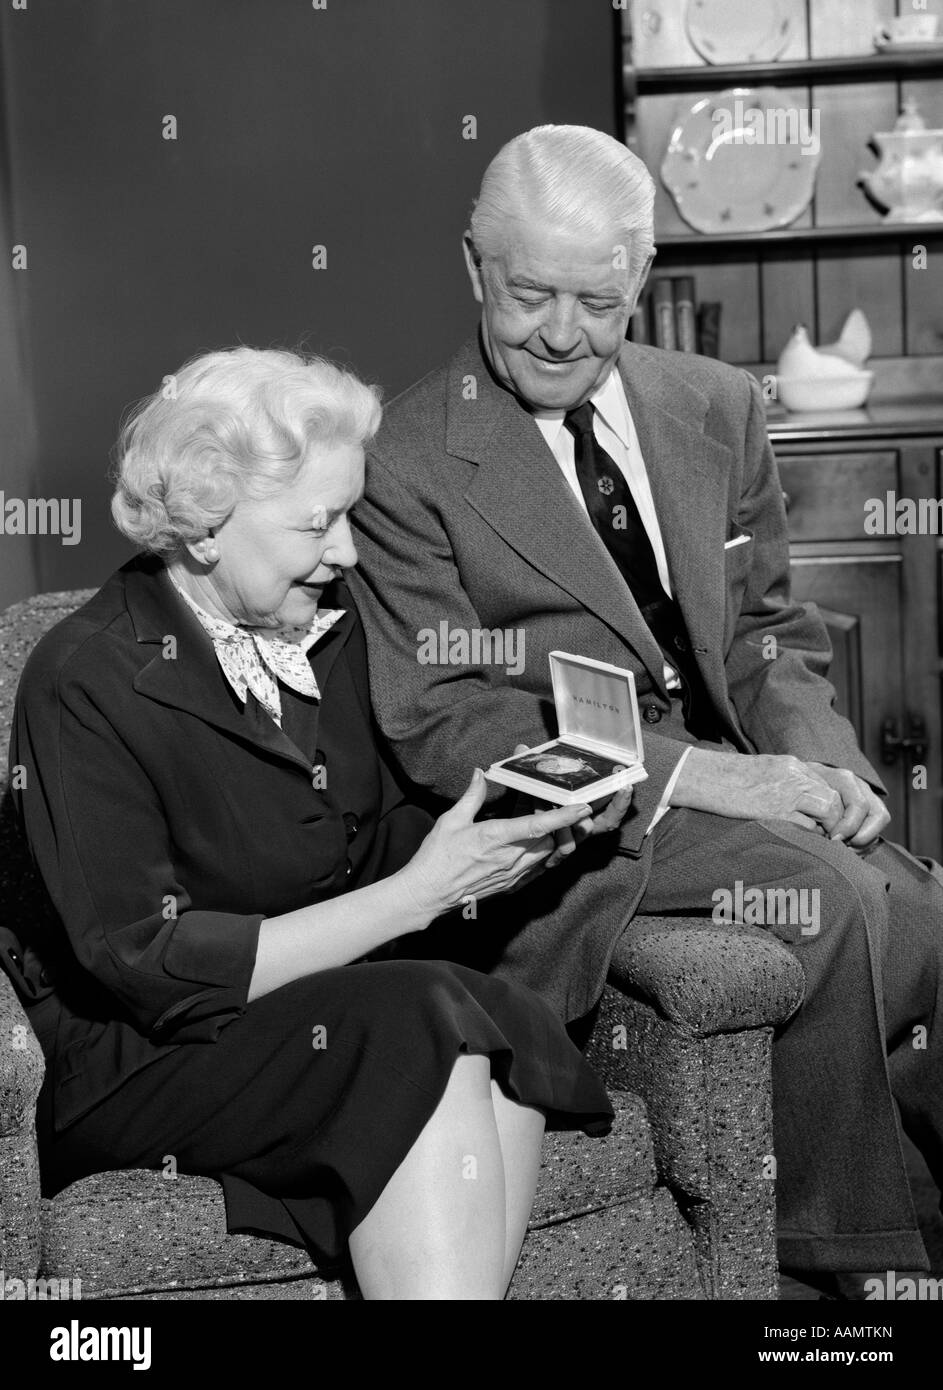 1950s ELDERLY WOMAN SEATED IN ARMCHAIR OPENING JEWELRY GIFT BOX WITH HUSBAND SEATED ON ARM OF CHAIR Stock Photo